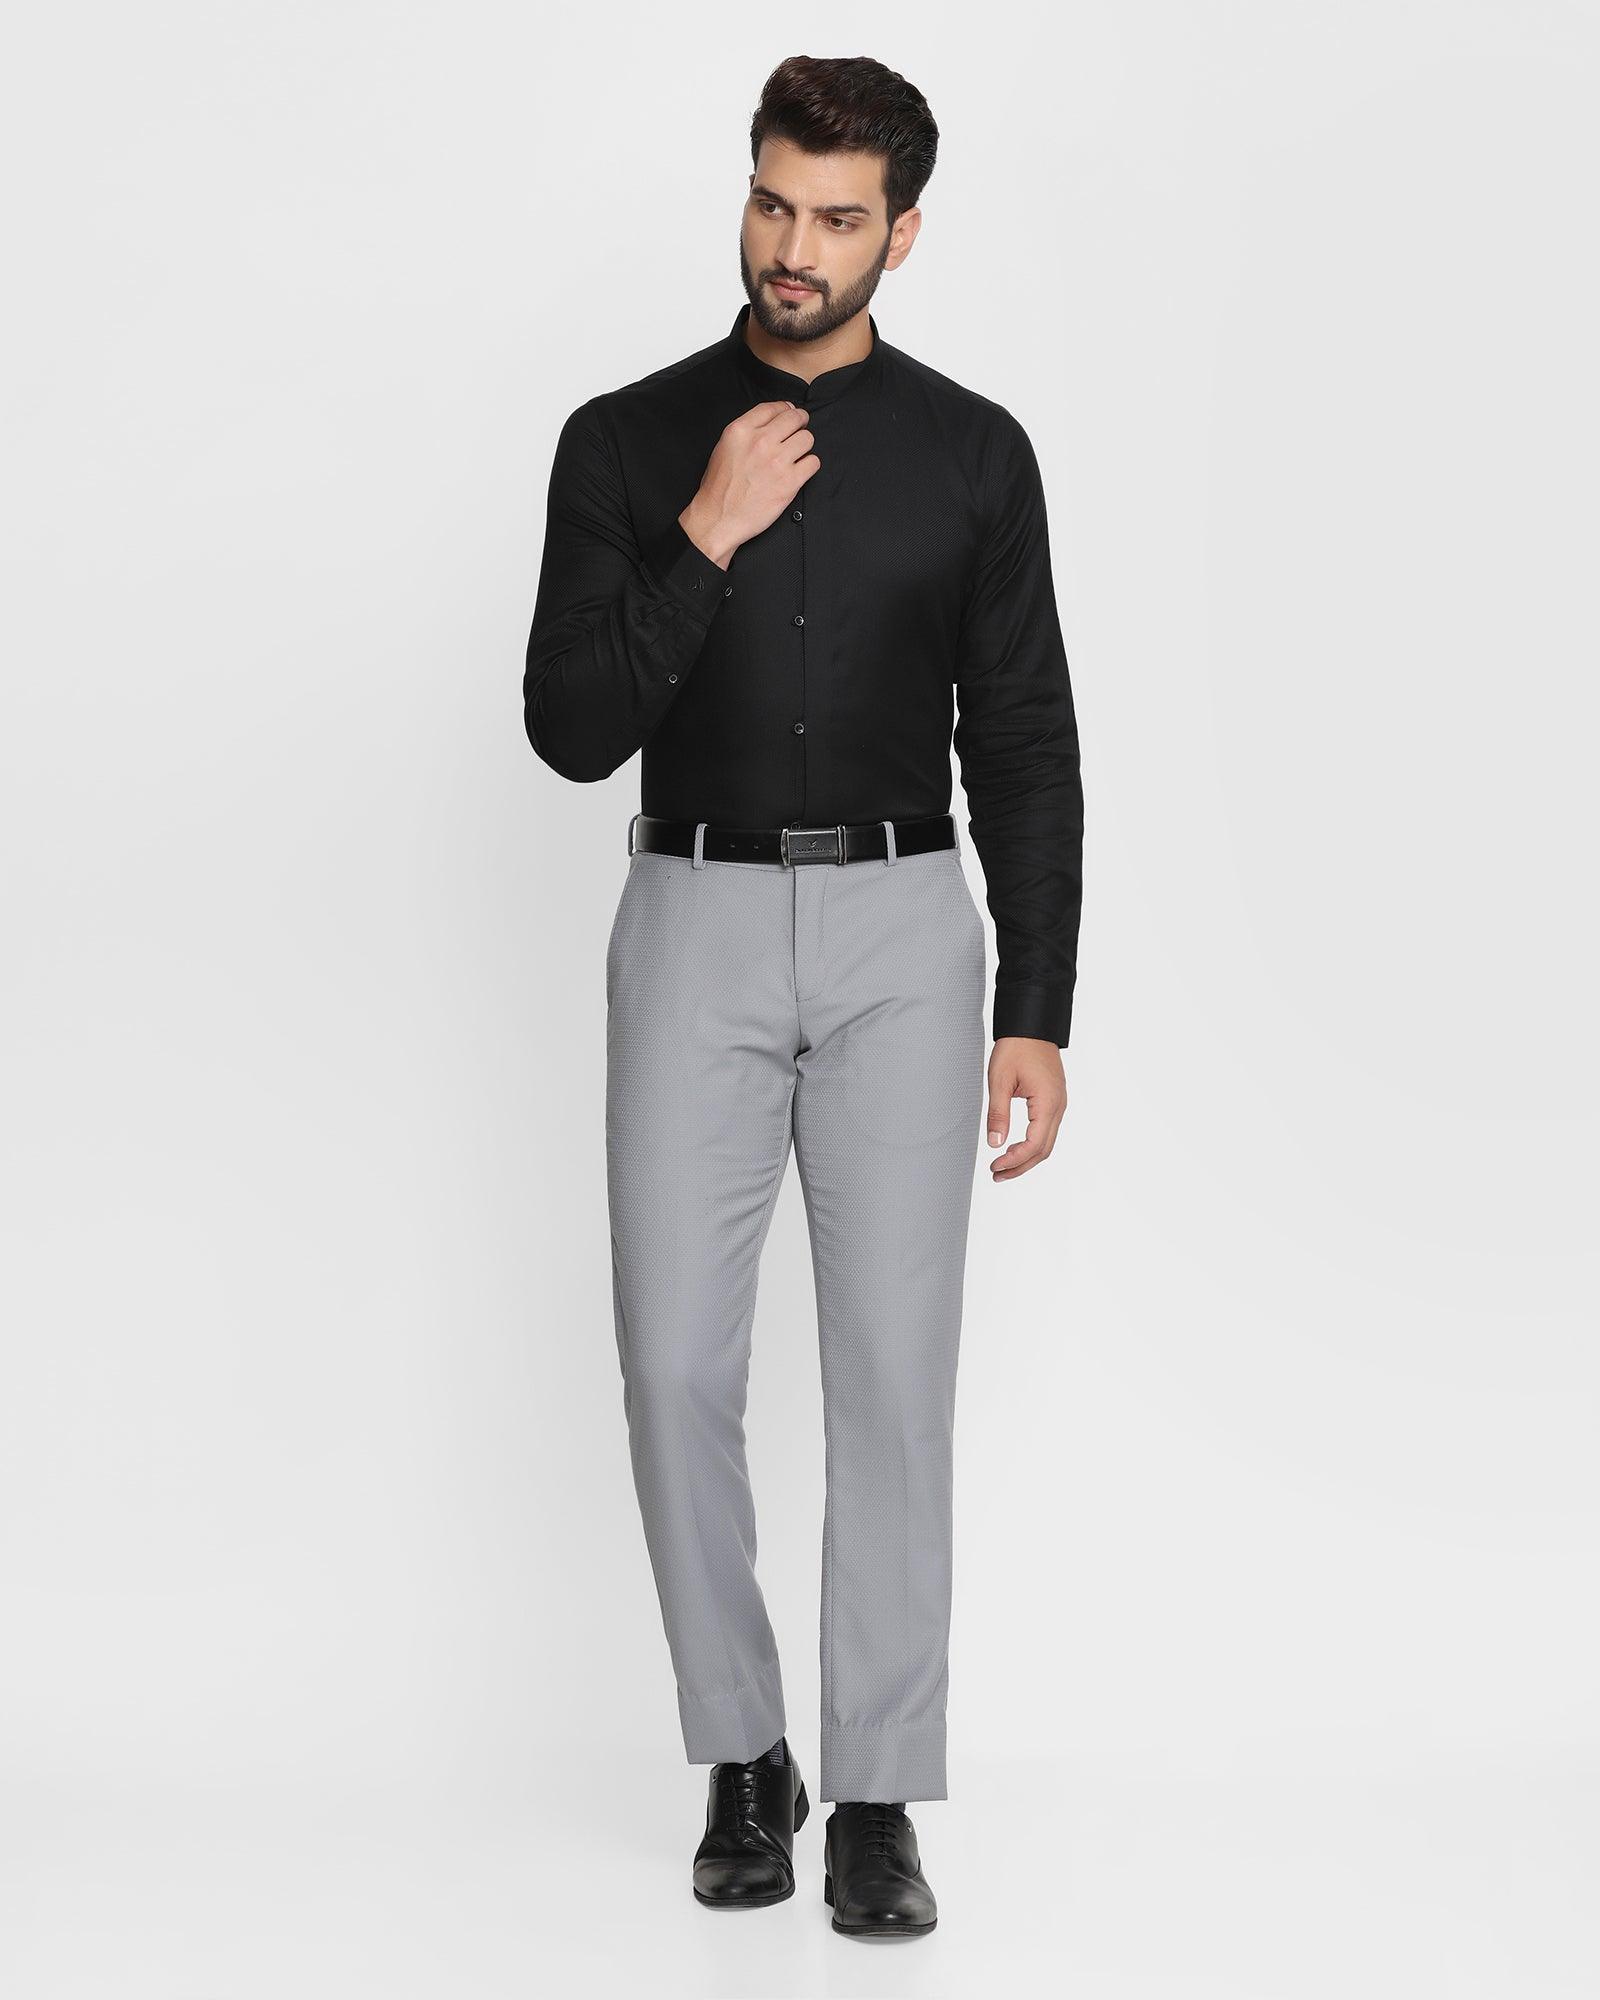 Formal Black Textured Shirt - Trout